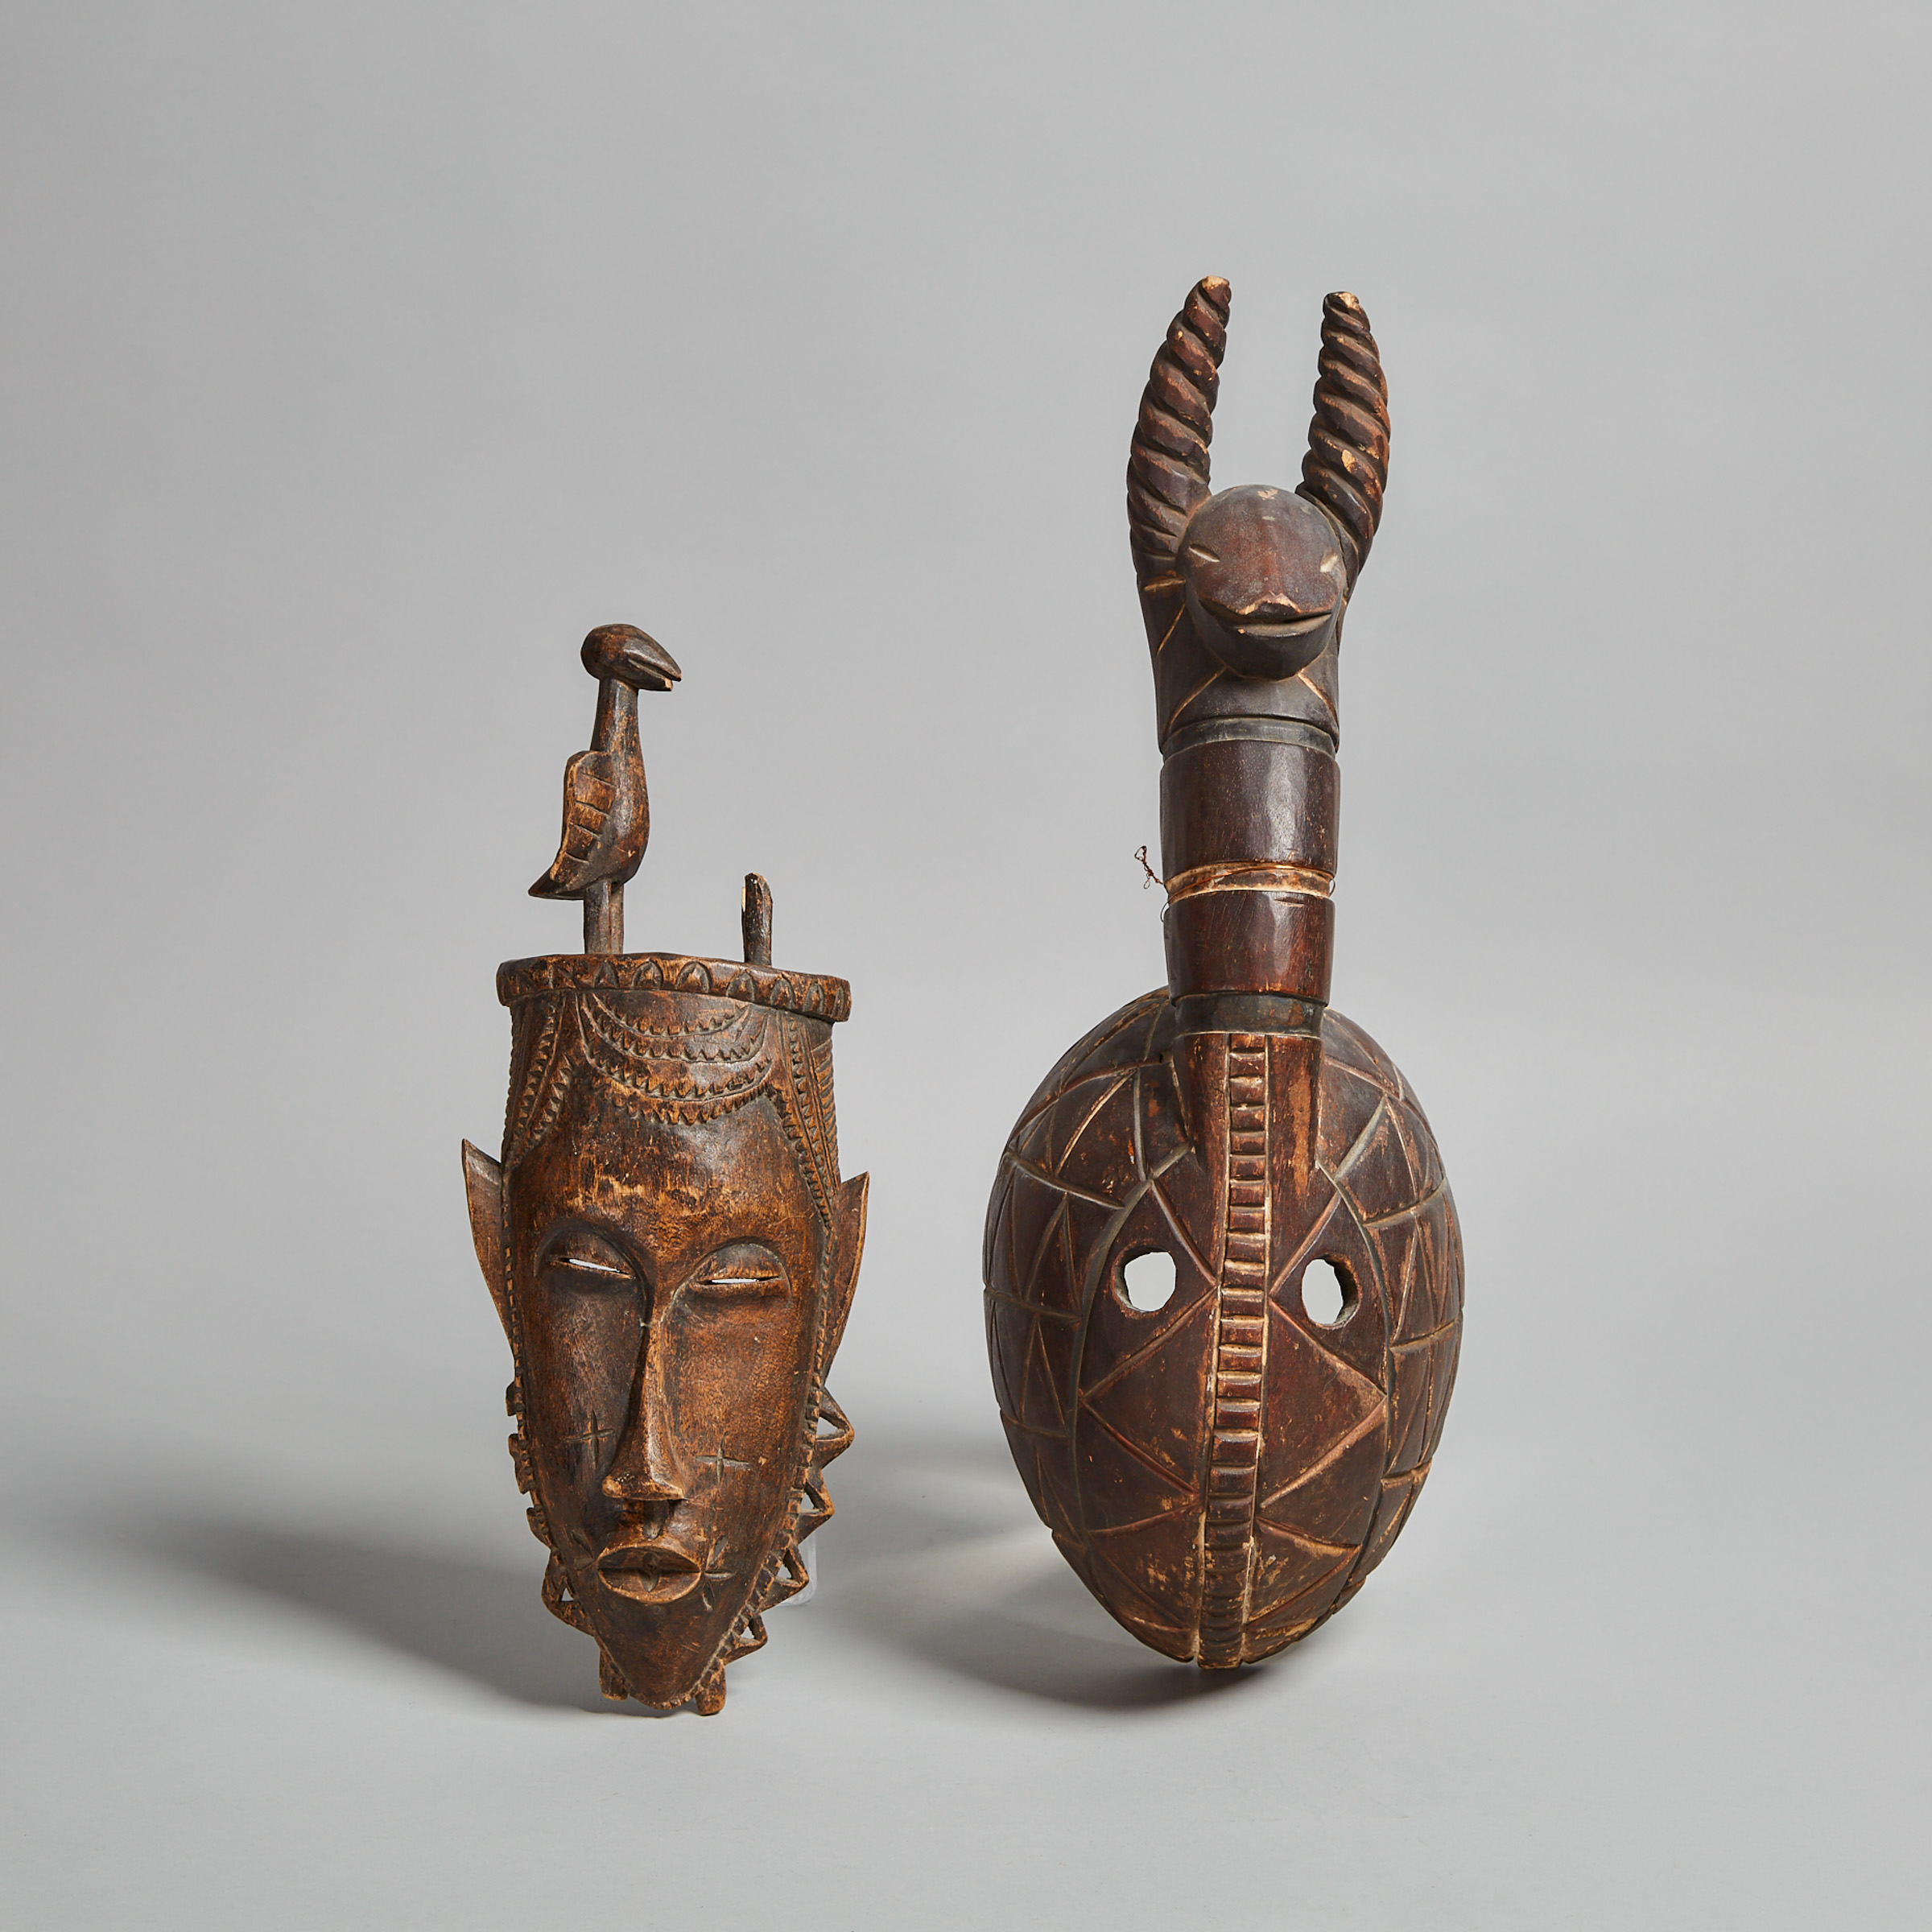 Yaure Mask together with a Modern Mask, possibly Dogon, Africa